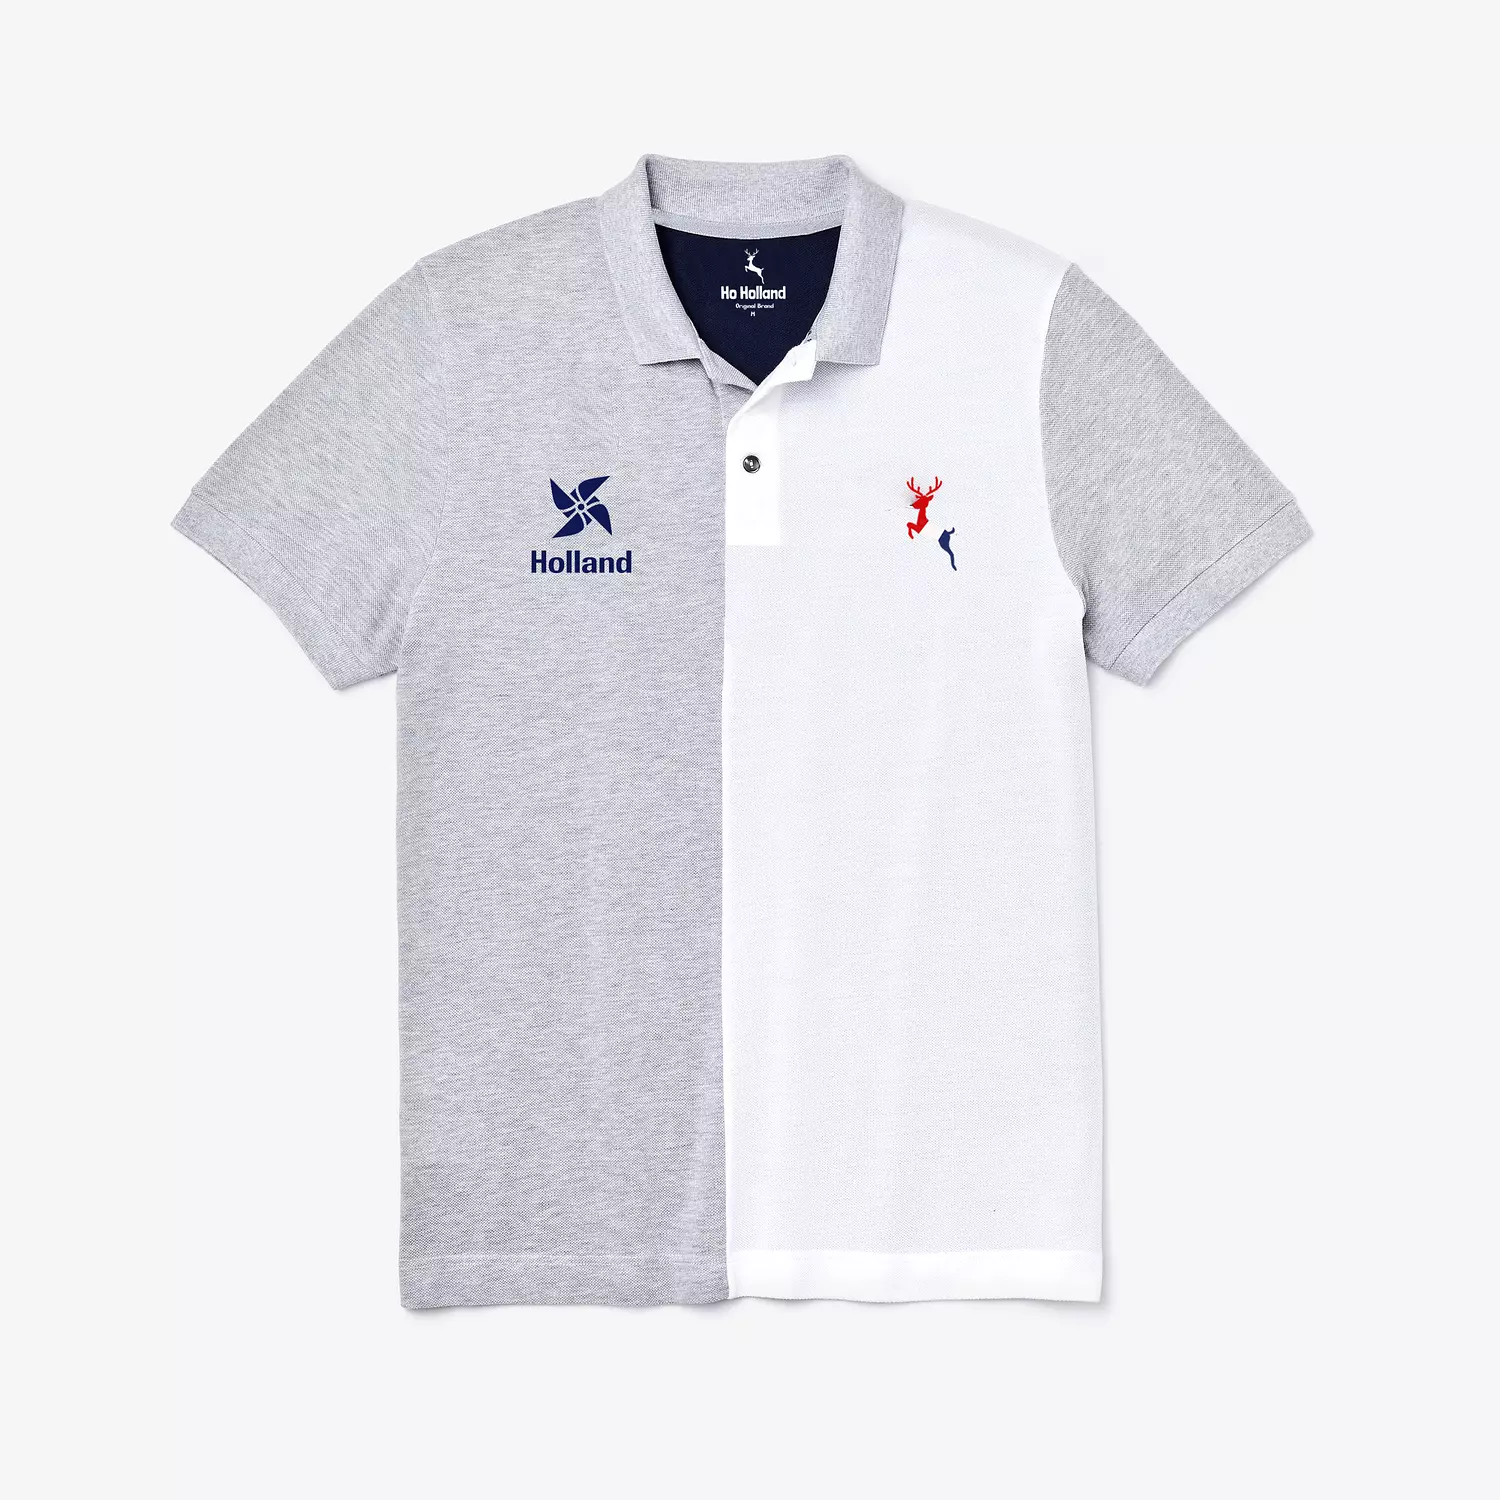 Polo T shirt - Grey & White hover image